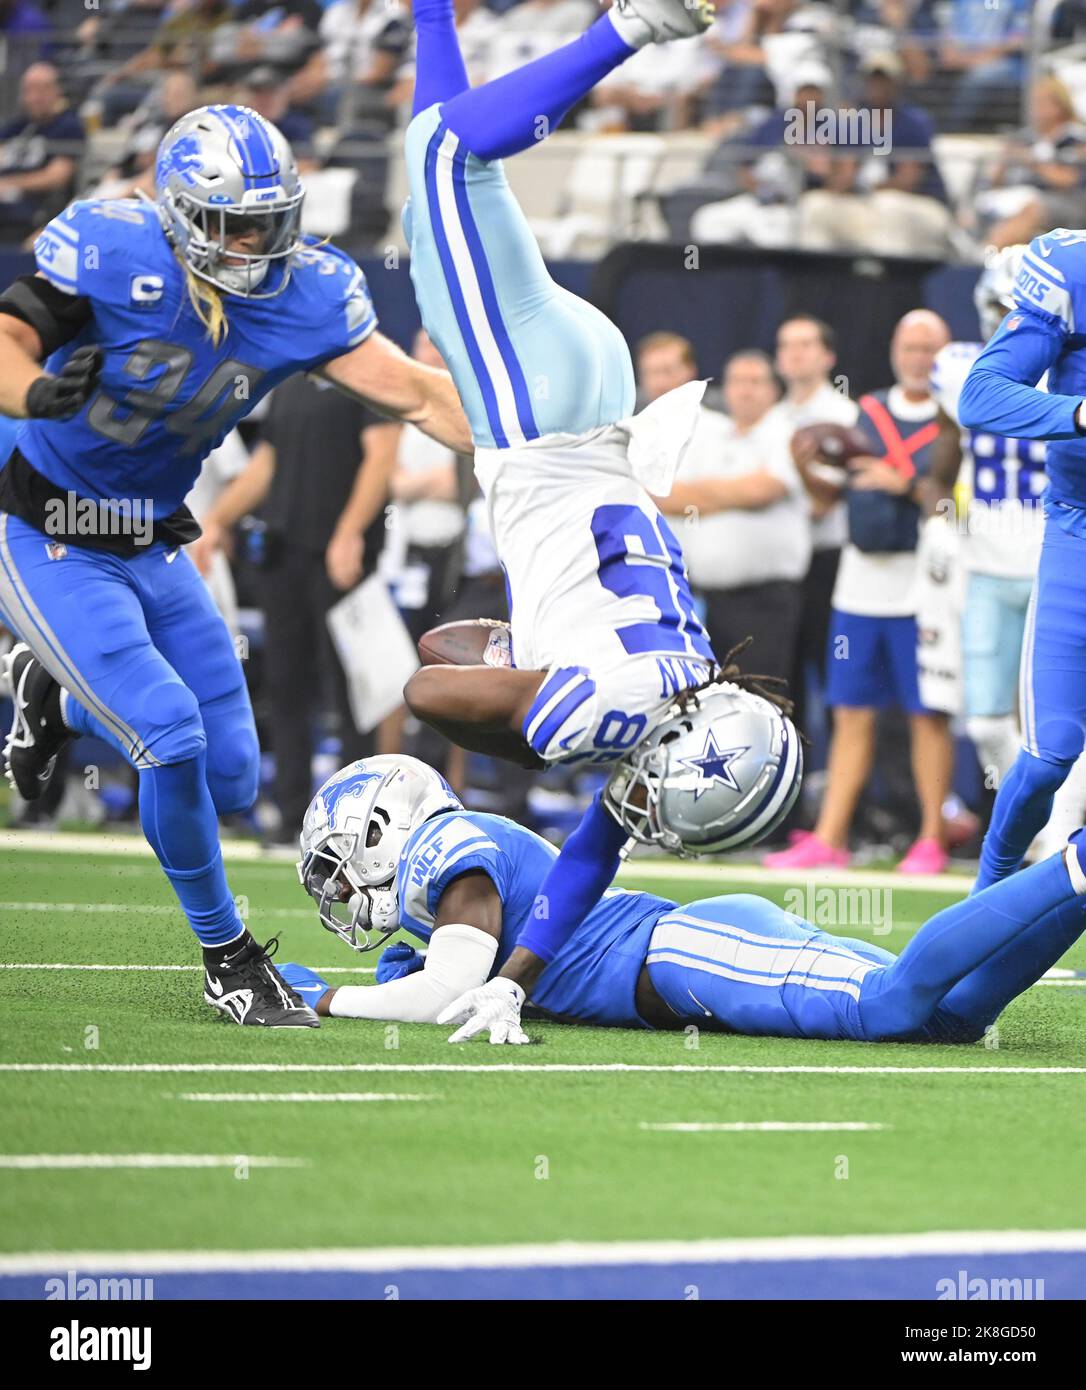 Arlington, United States. 23rd Oct, 2022. Dallas Cowboys Noah Brown gets flipped short of the endzone and fumbled on the play against the Detroit Lions during their NFL game at AT&T Stadium in Arlington, Texas on Sunday, October 23, 2022. Photo by Ian Halperin/UPI Credit: UPI/Alamy Live News Stock Photo